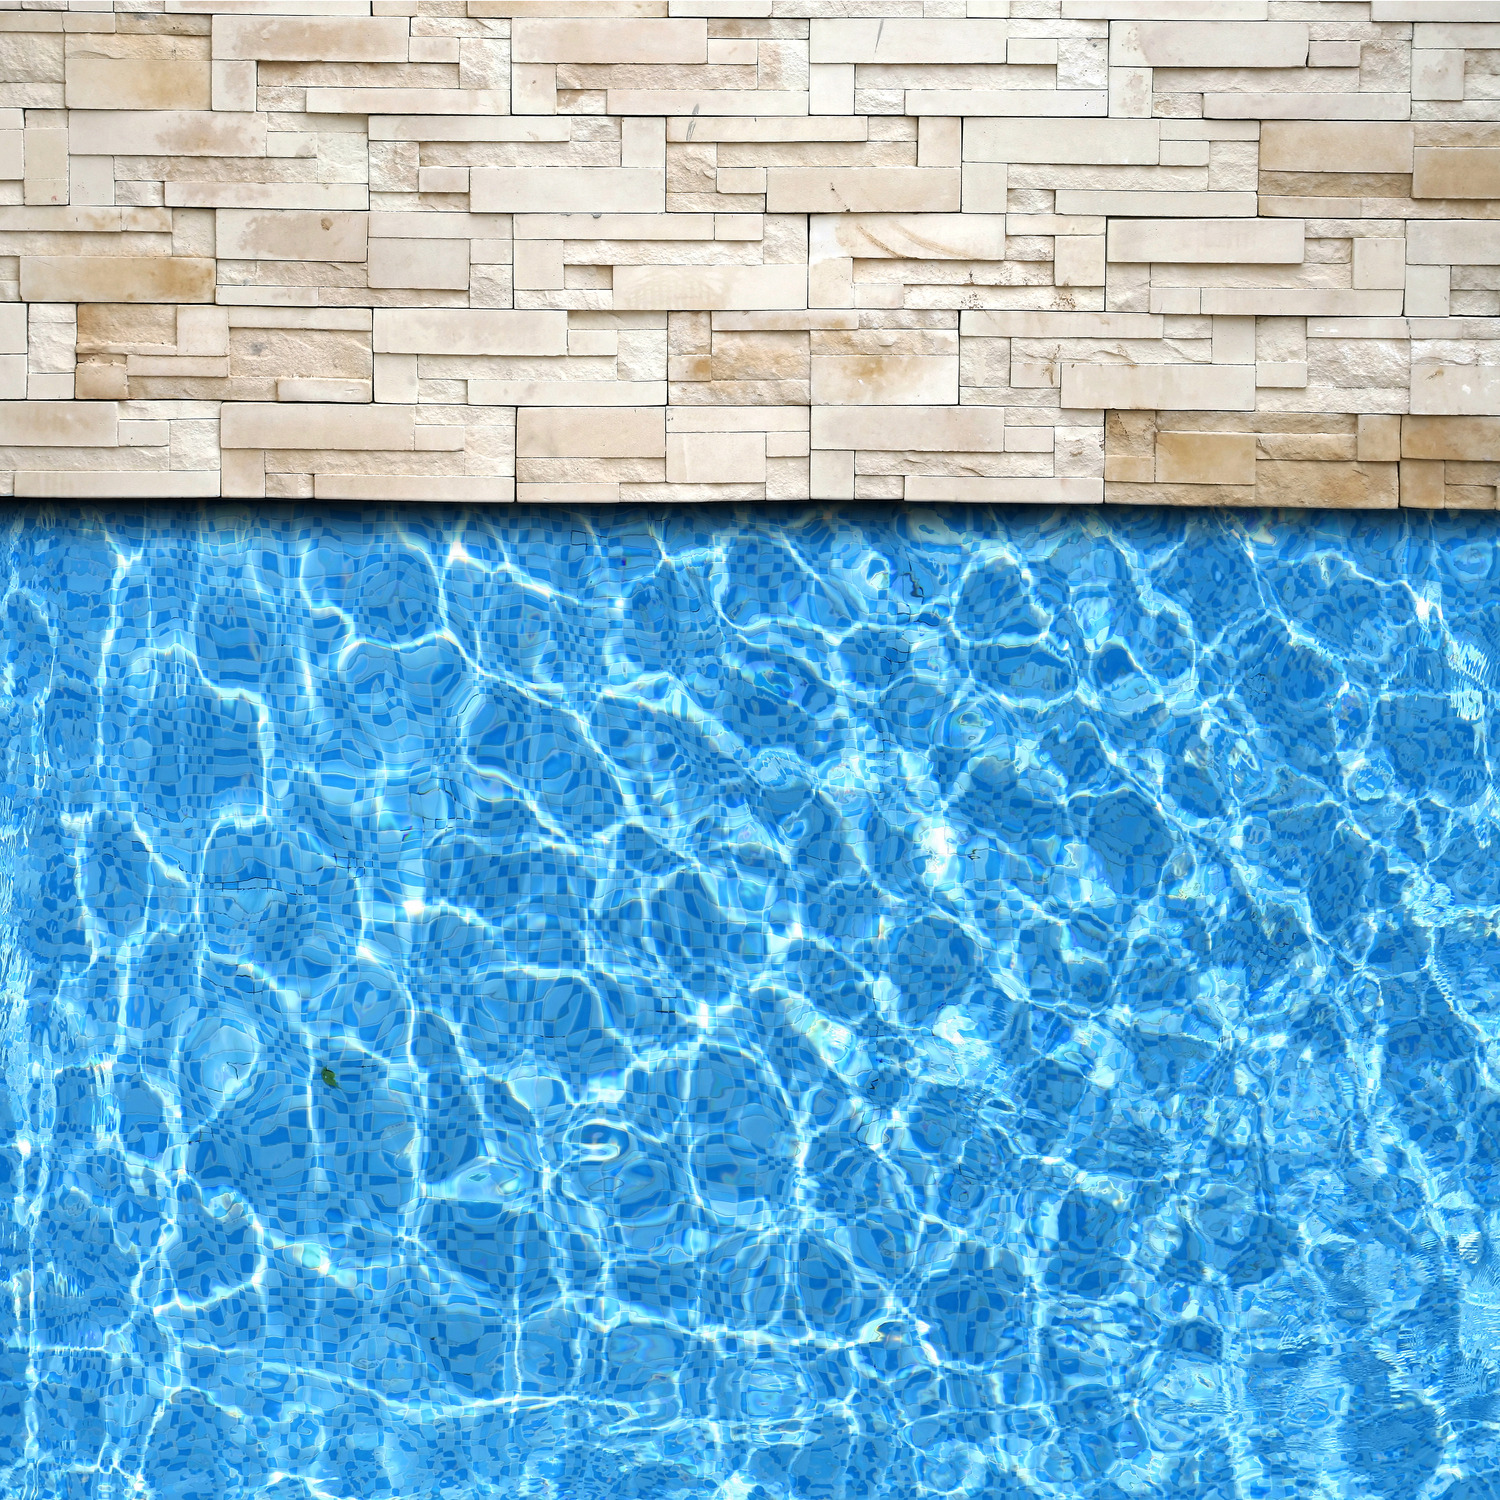 The Psychology of Blue: Why Pool Water Color Matters